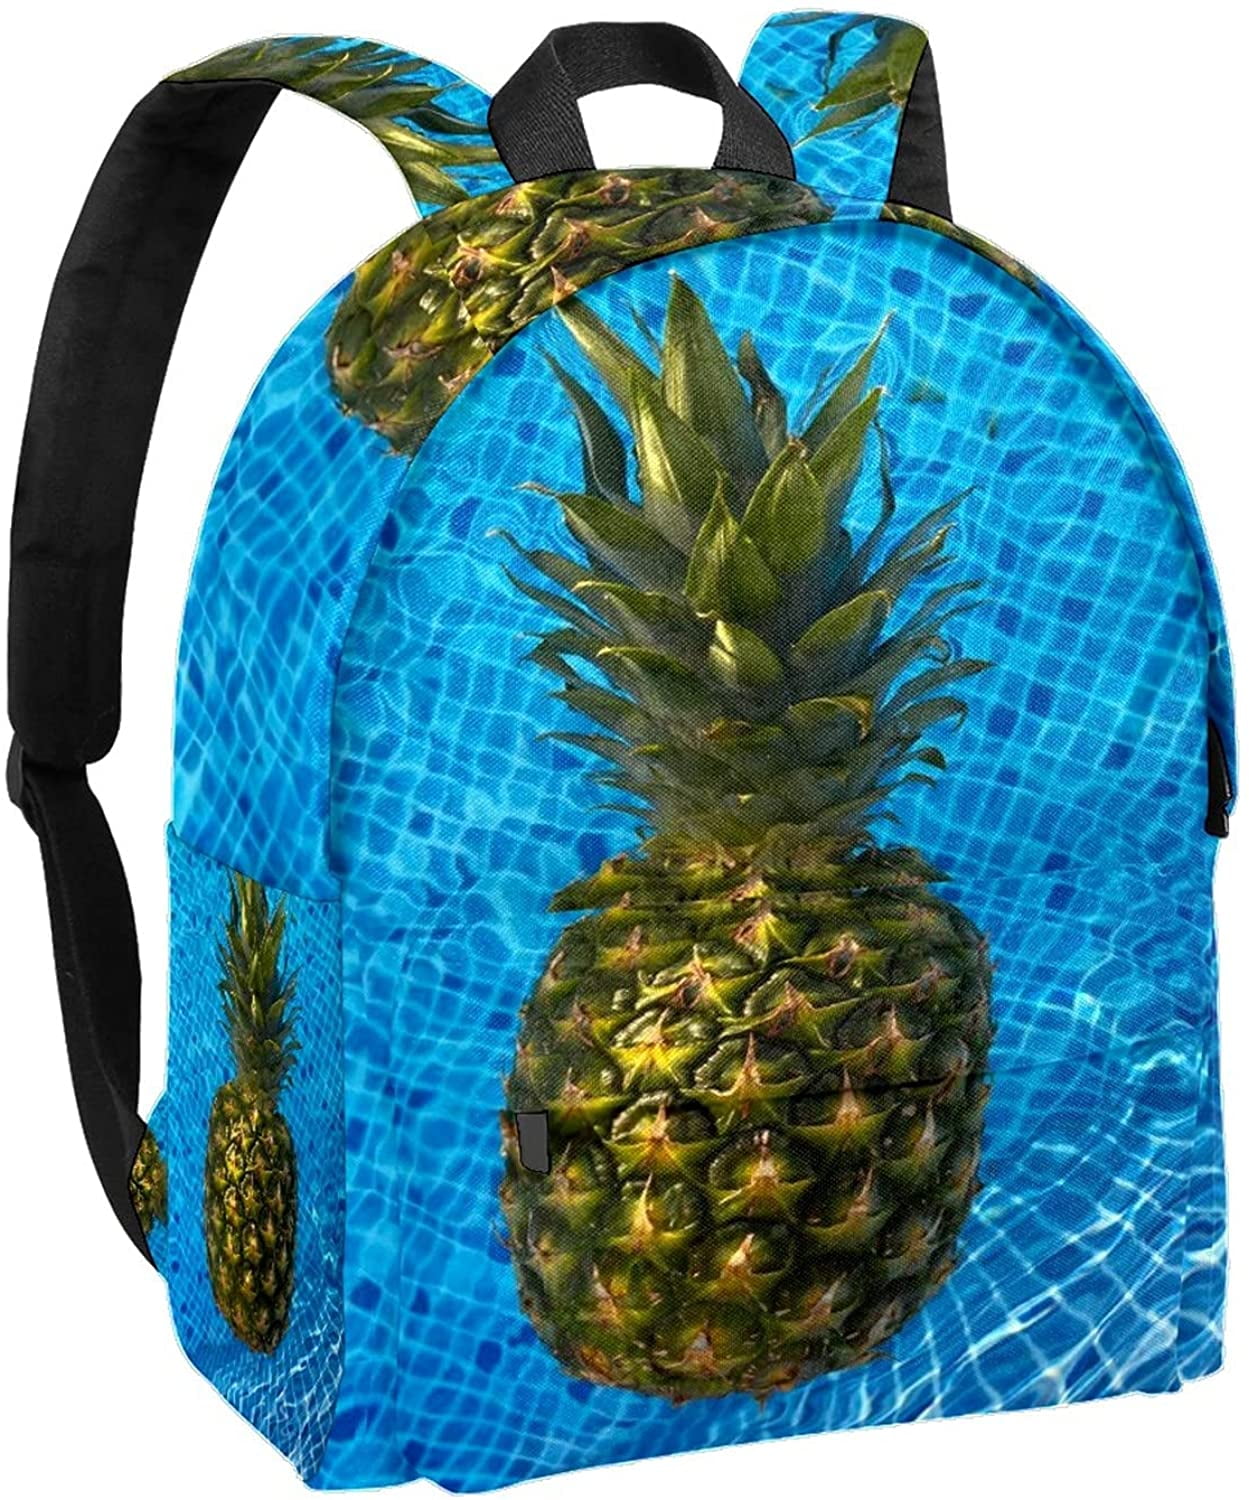 Pineapples Summer School Bookbags Computer Daypack for Travel Hiking Camping Laptop Backpack Boys Grils